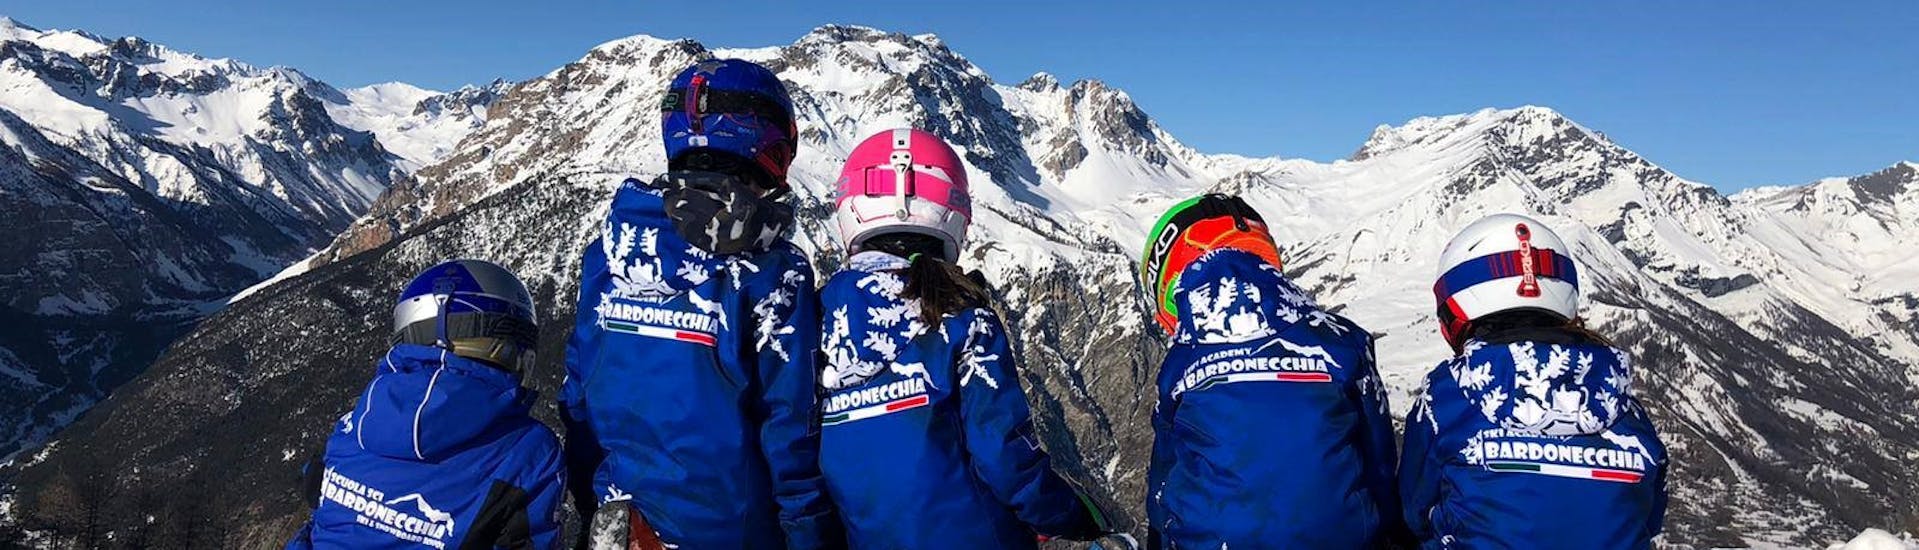 Kids and the mountains of Bardonecchia during one of the kids ski lessons for all levels. 